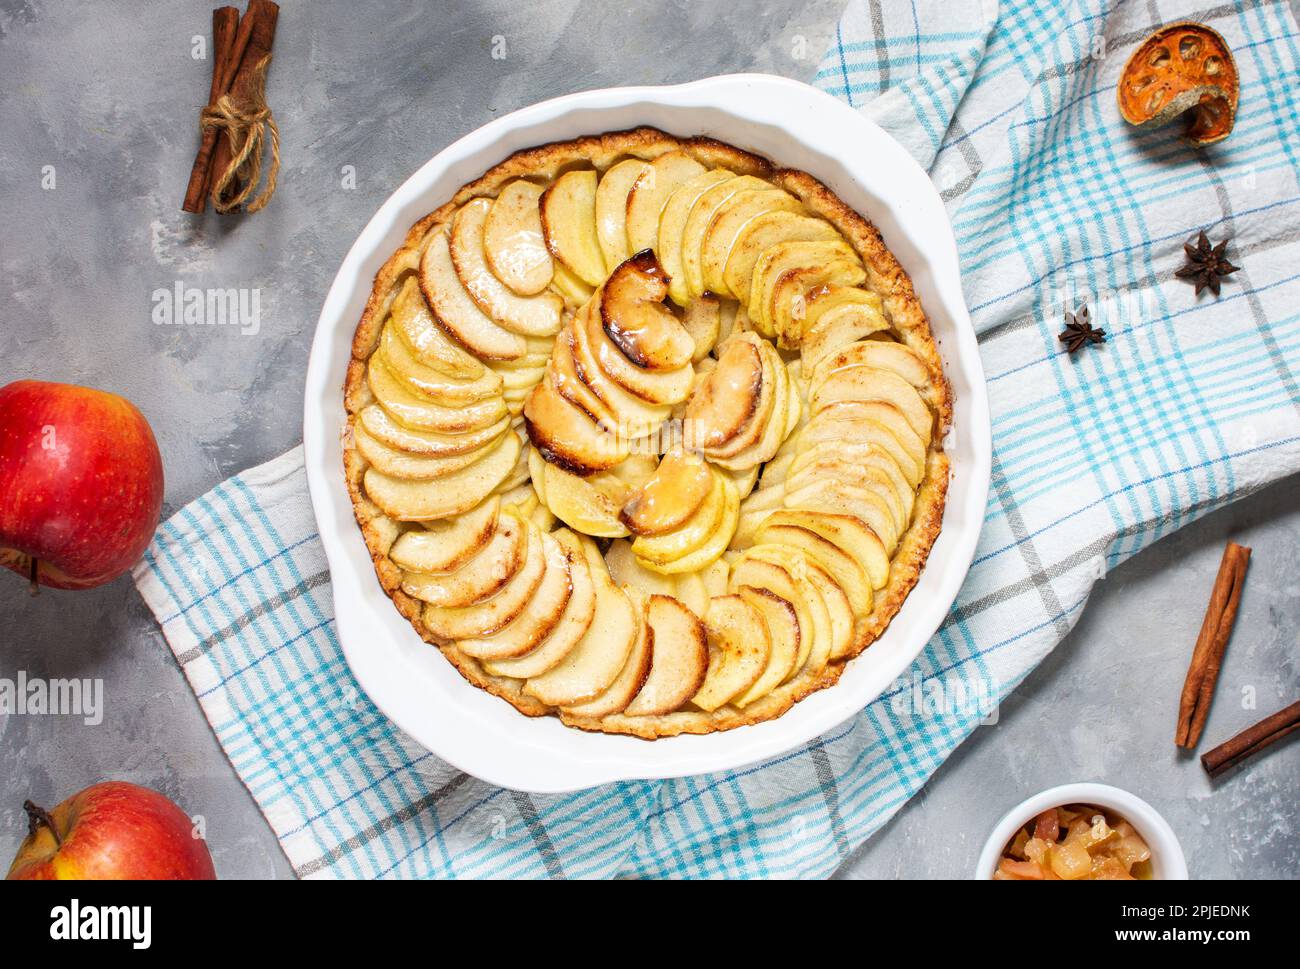 Homemade delicious fresh baked rustic apple pie on concrete background, top view. Stock Photo